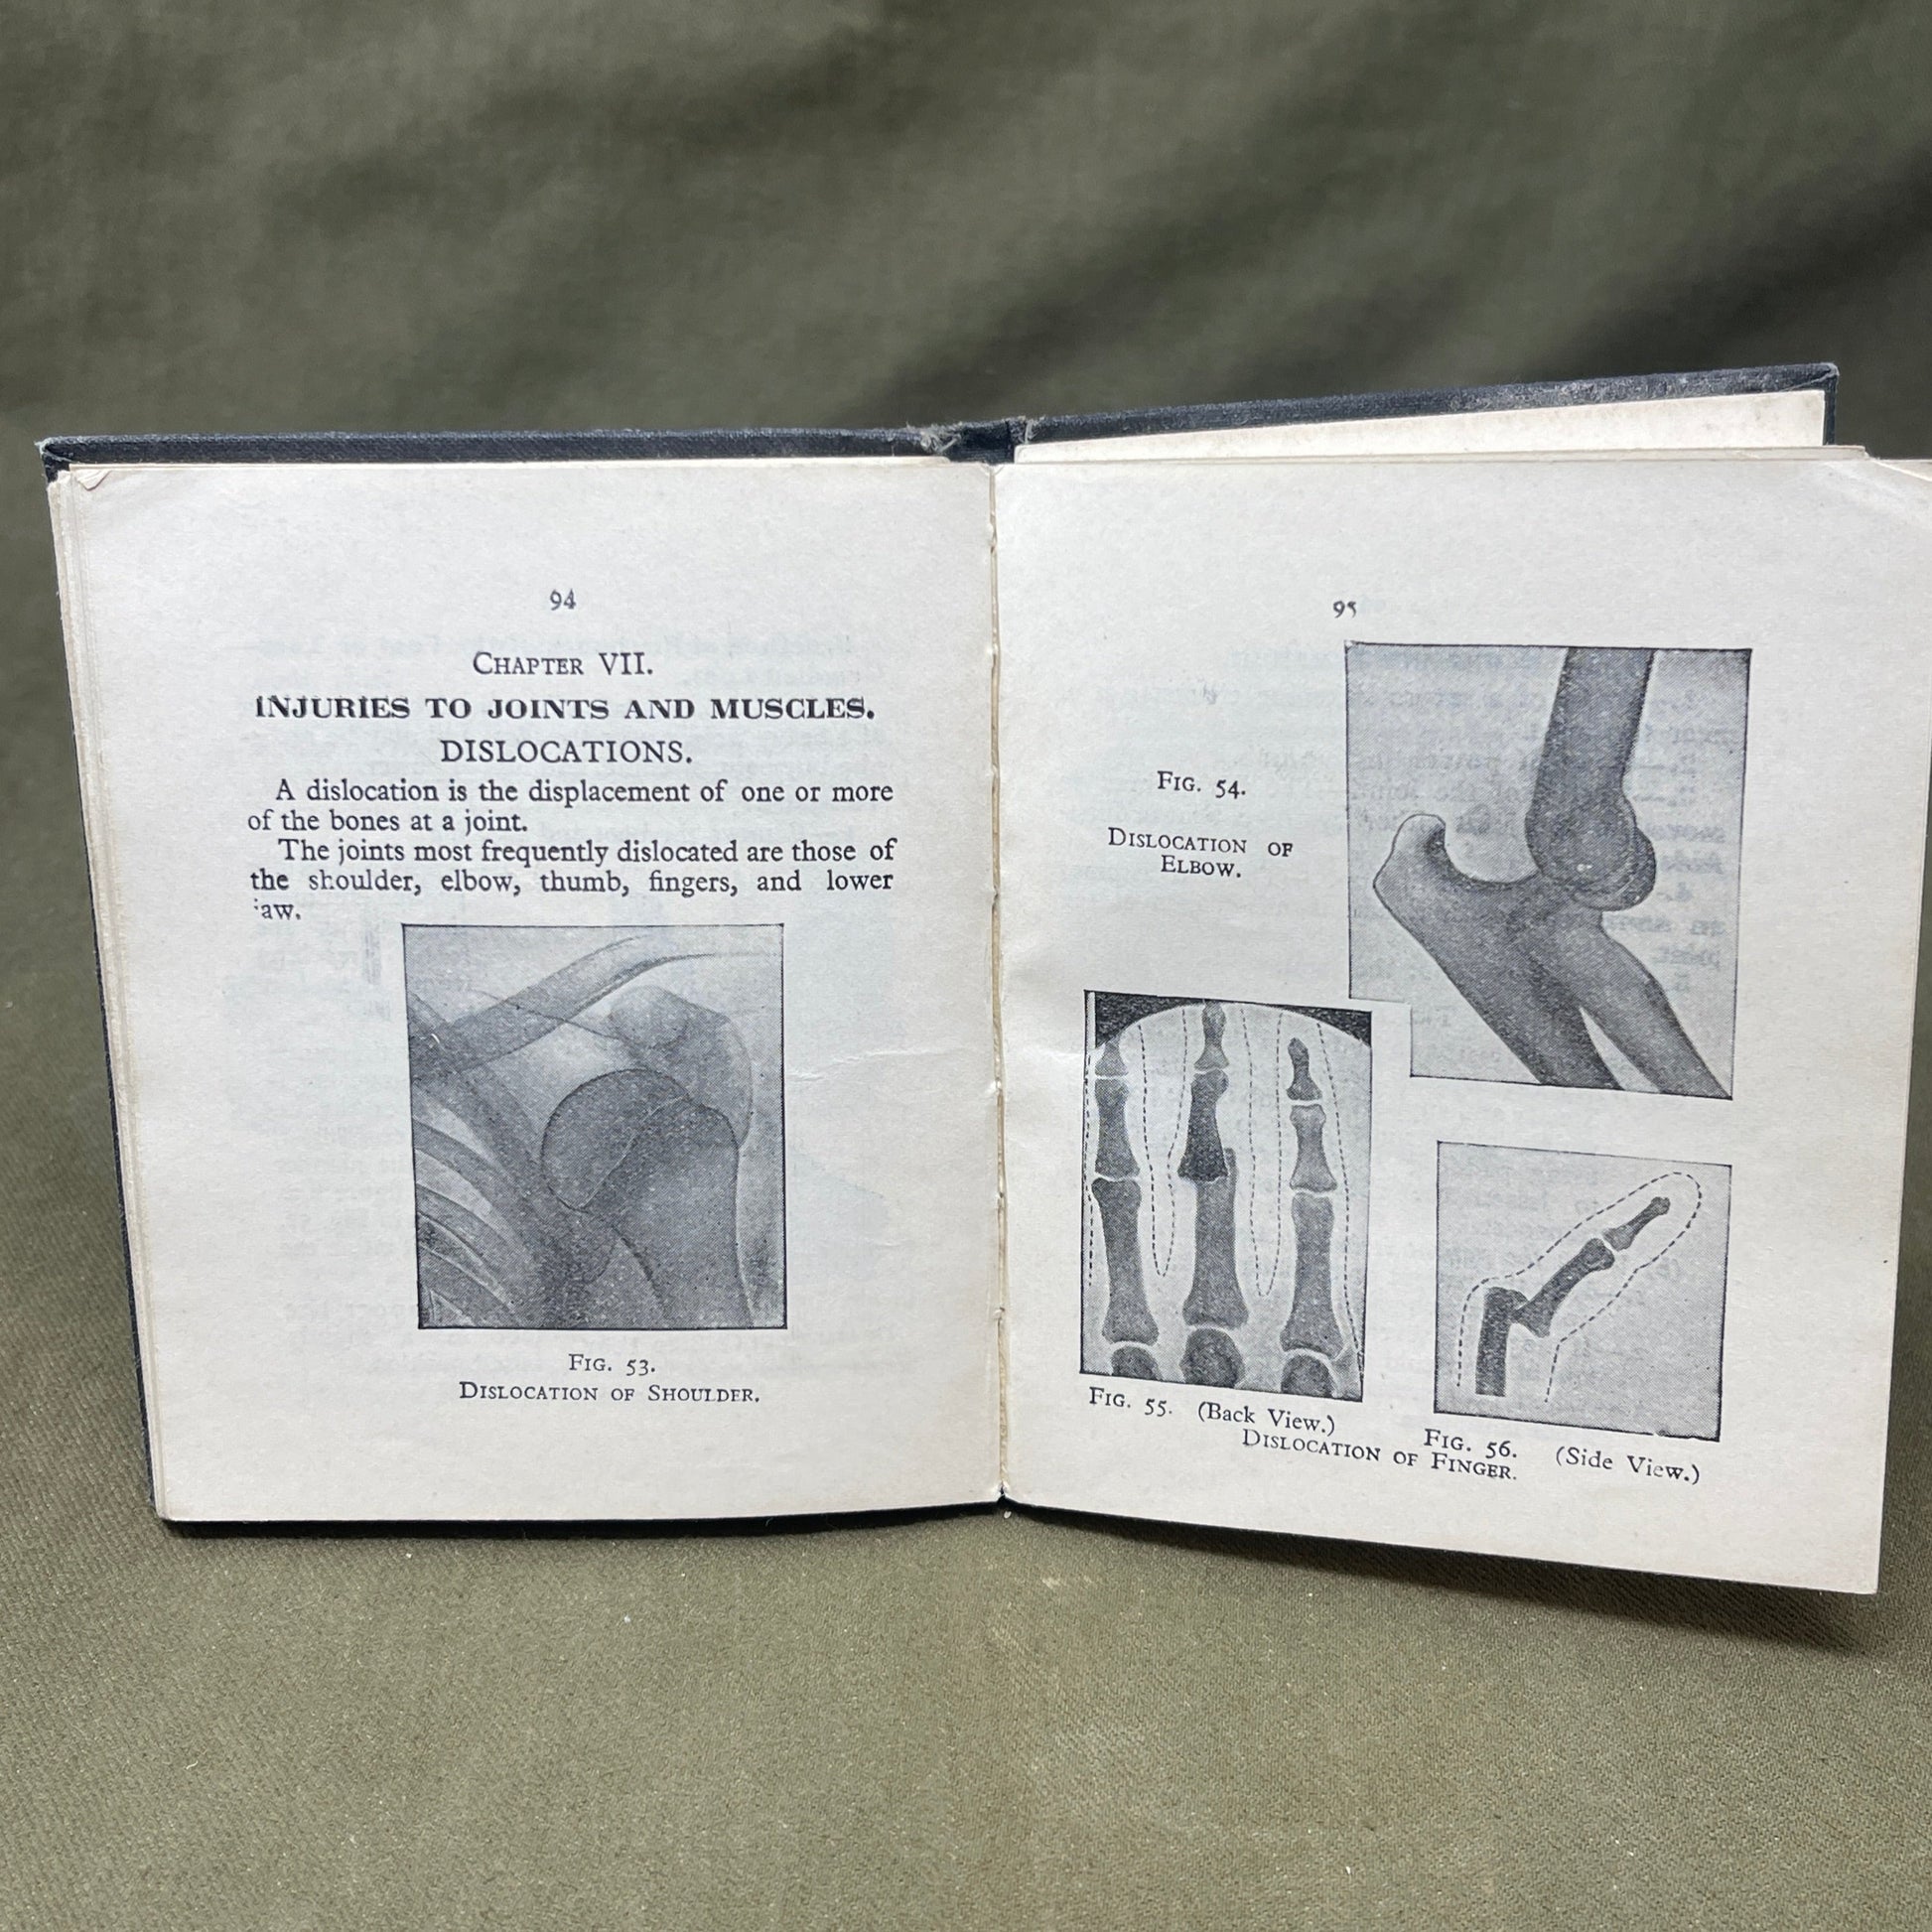 1939 First Aid To The Injured Book, St John’s Ambulance - Used For ARP Training